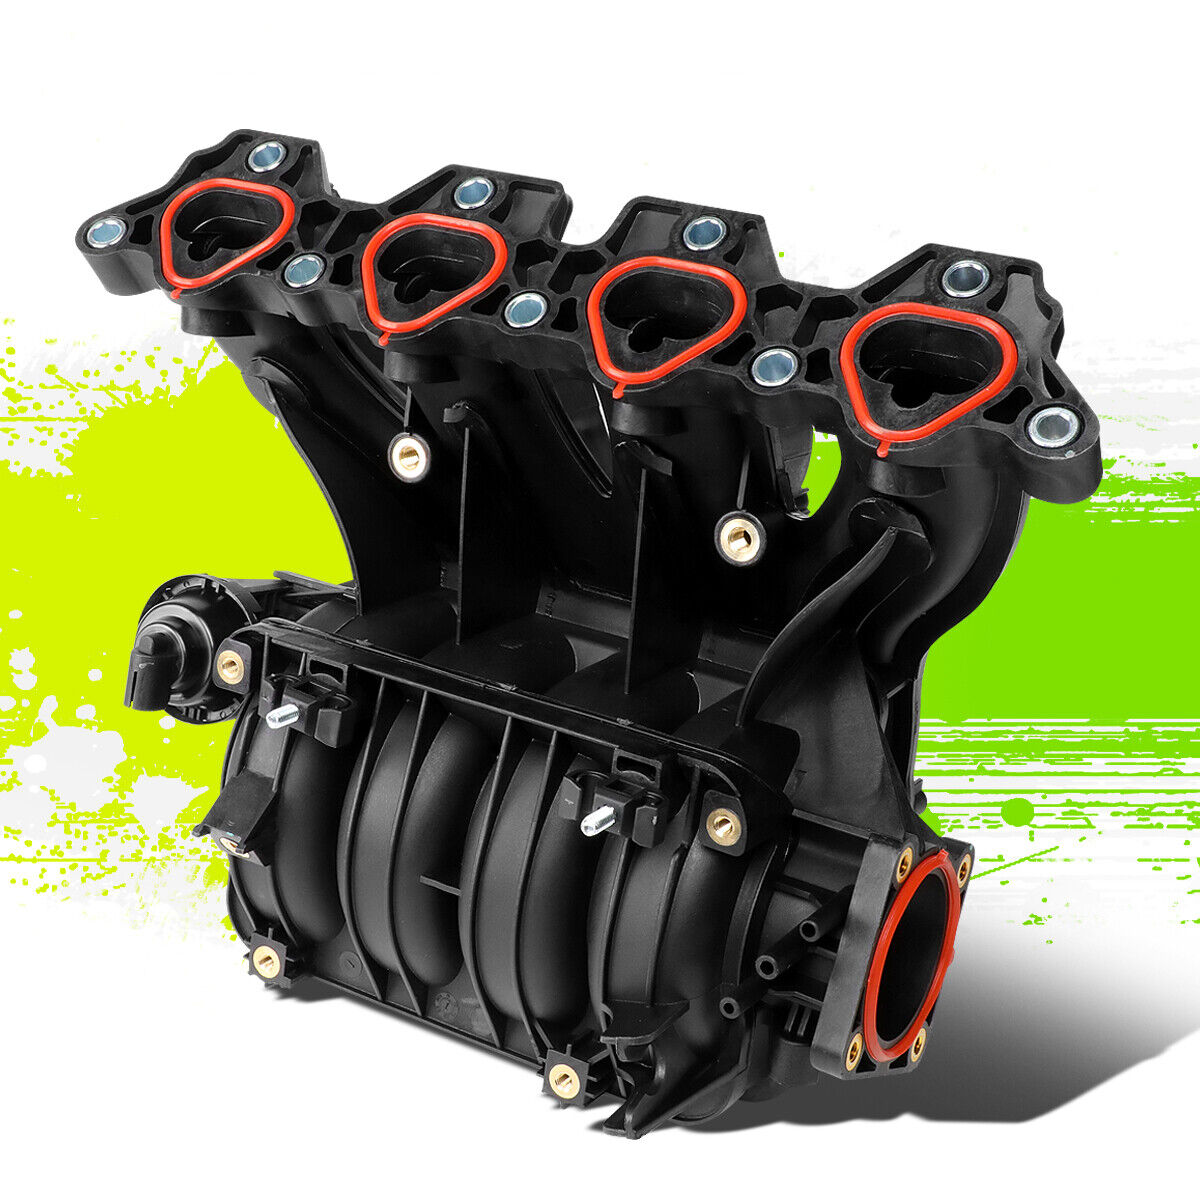 FOR BYUCK EXCELLE DEAWOO NEXIA OE STYLE ENGINE INLET INTAKE MANIFOLD ASSEMBLY